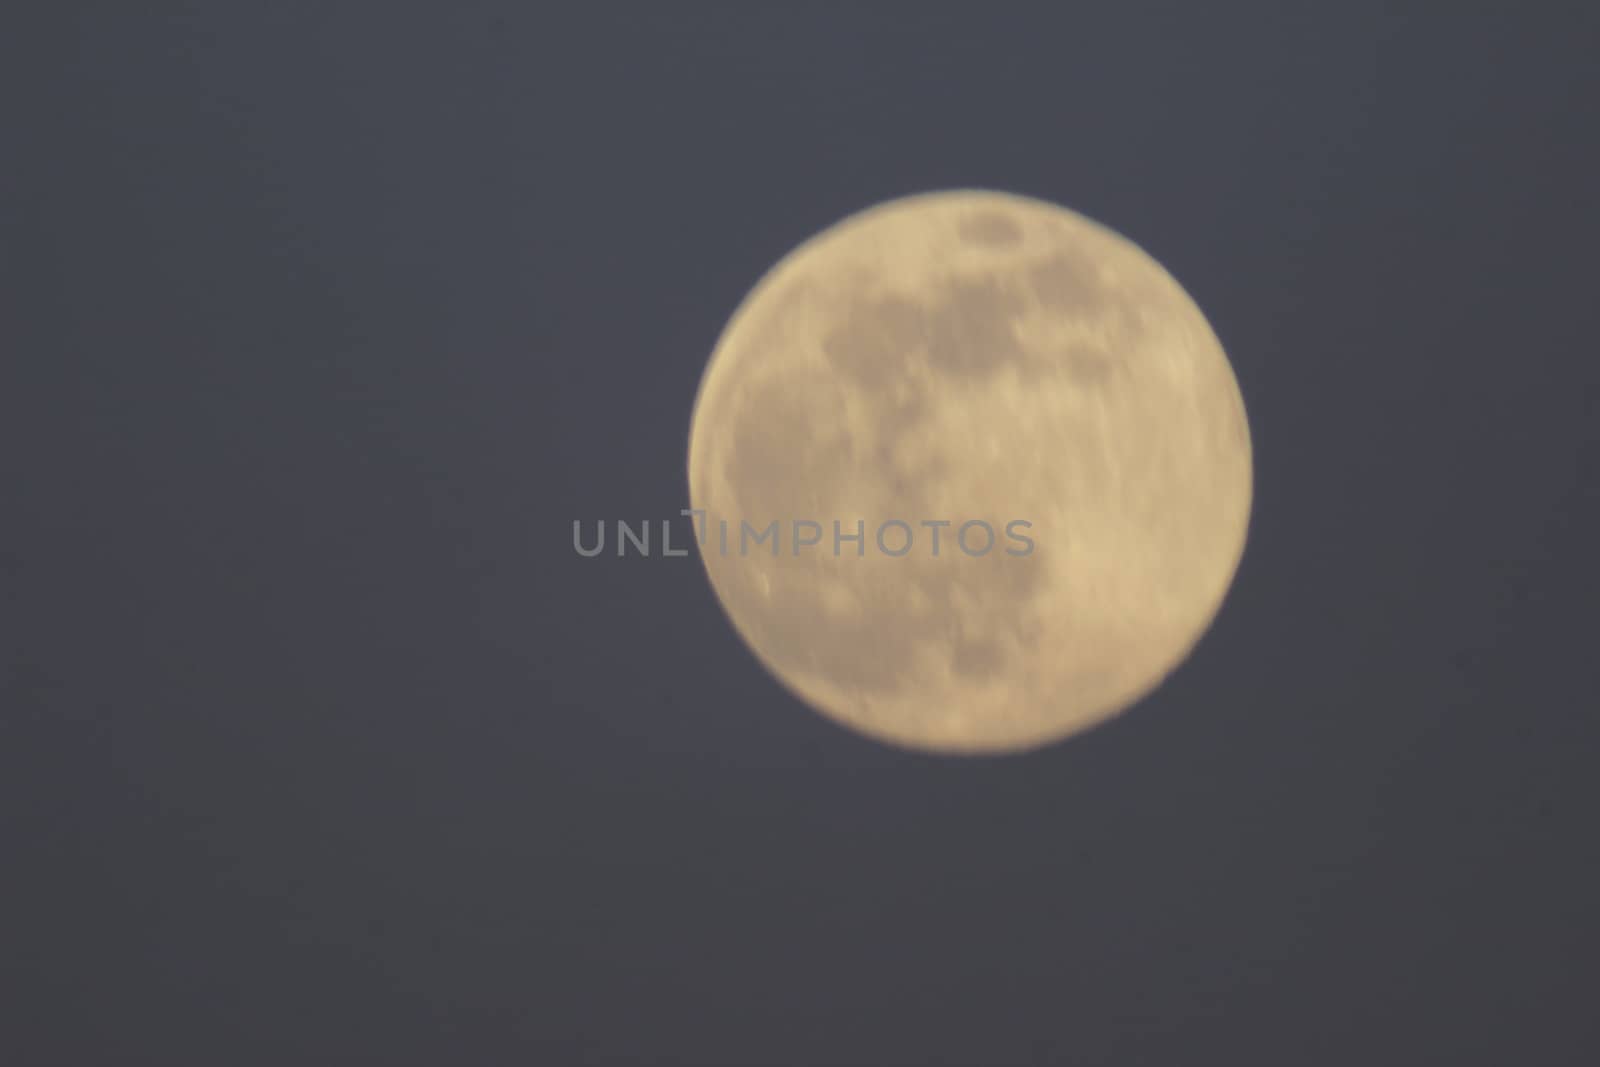 Super moon close-up pictures from April at Vienna by hanibalsmith18